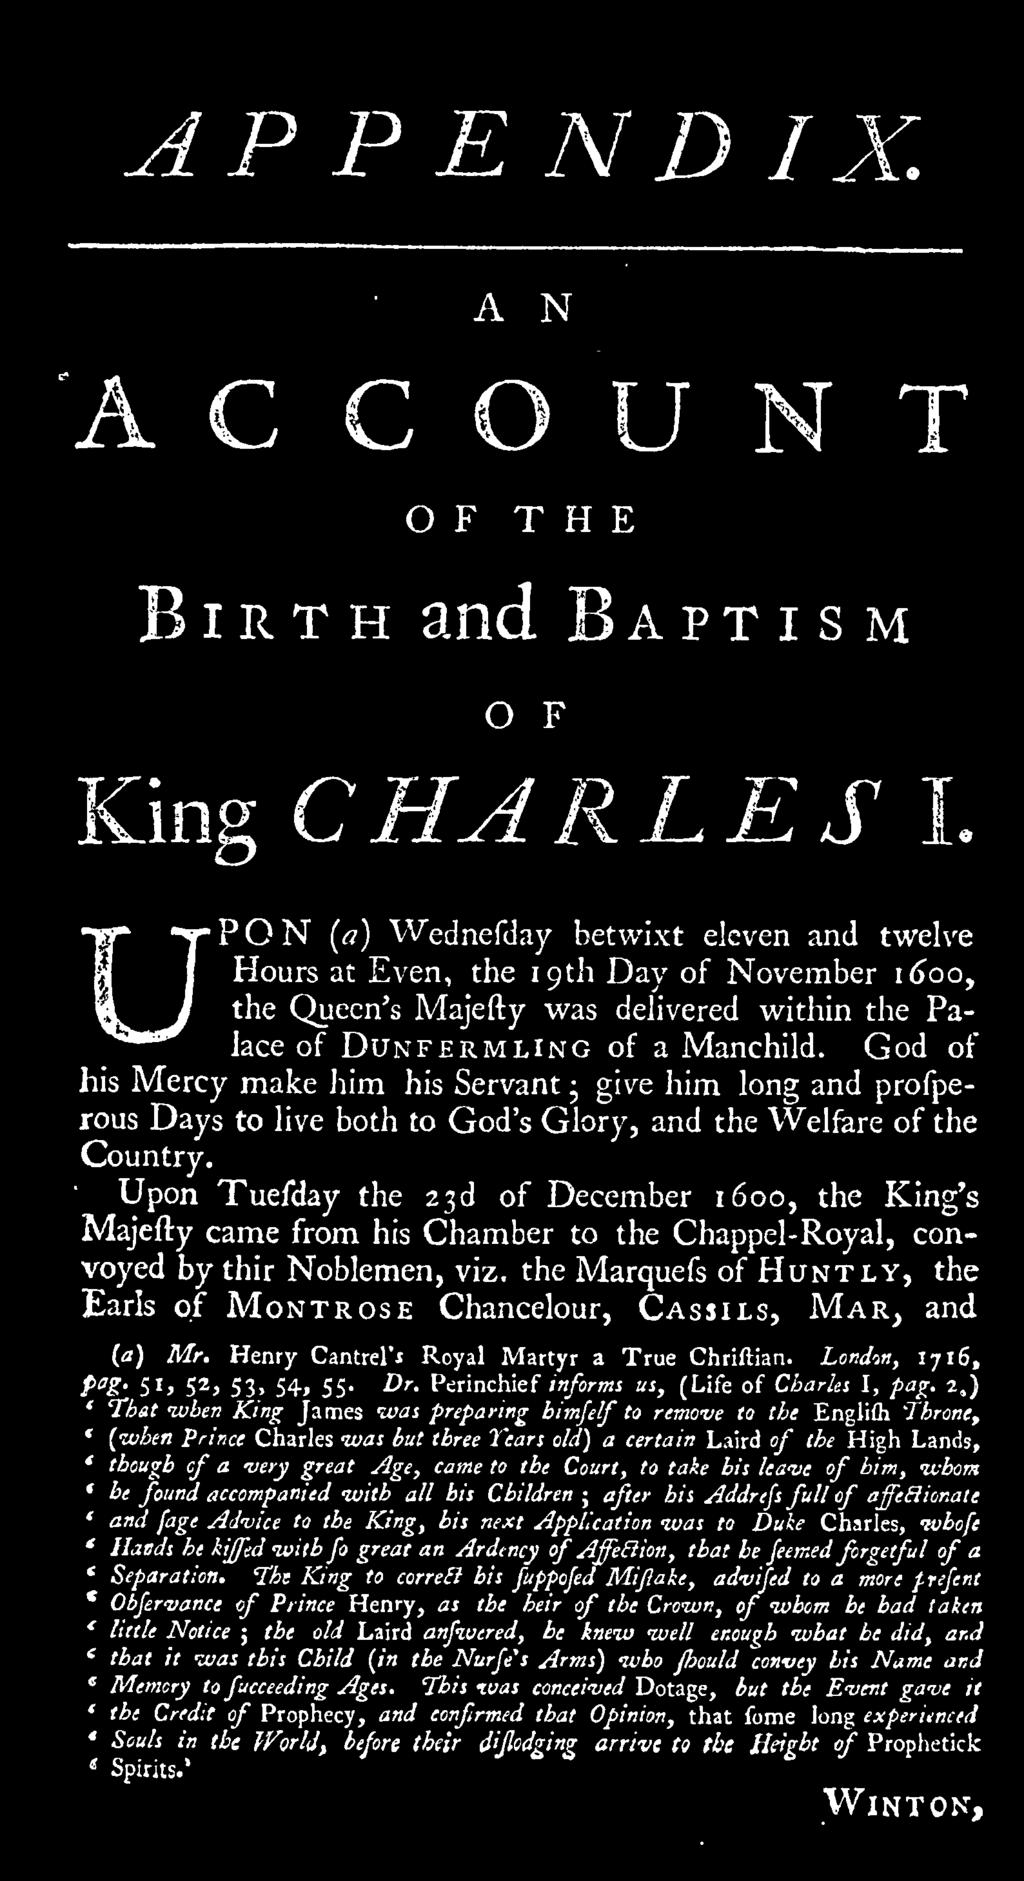 Cassils, Mar, and (a) Mr. Henry Cantreli Royal Martyr a True Chriftian. Lond^n, 17 1 6, P"?: Sij 52j 53, 54> 55- Dr. Pcrinchief /«/orwi us, (Life of Charles I, pa^.